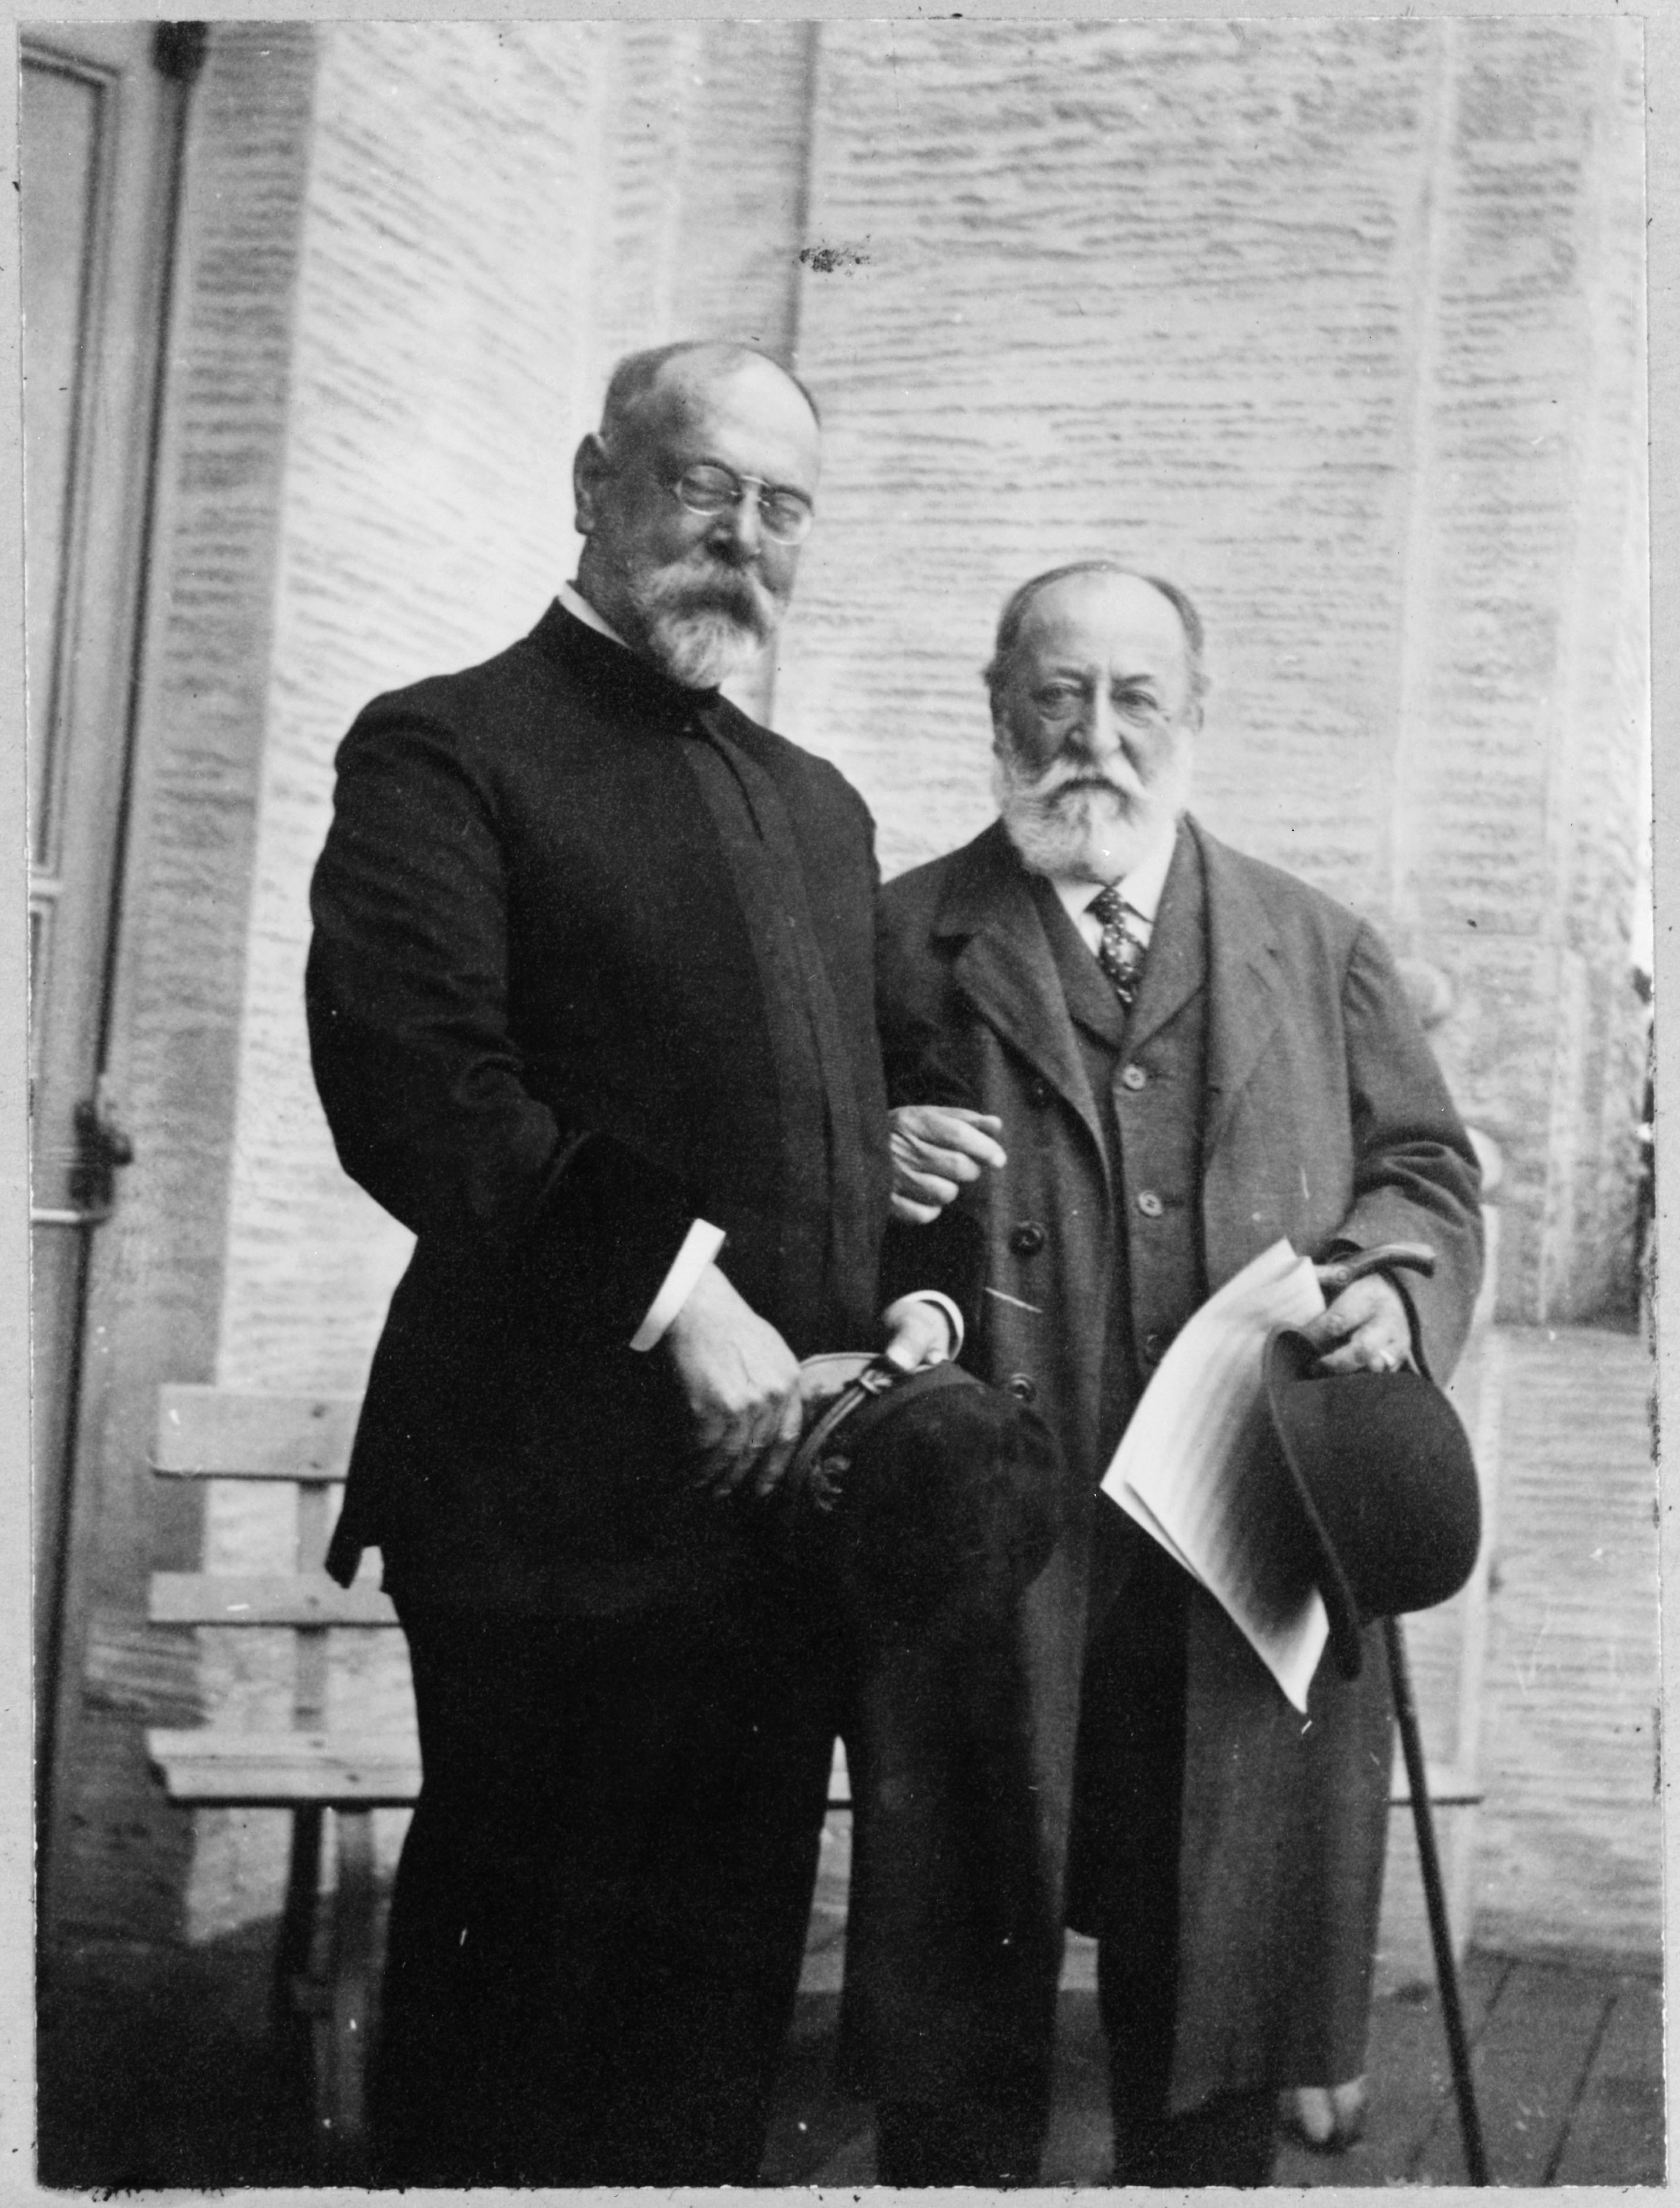 Photograph of John Philip Sousa standing with Camille Saint-Saëns